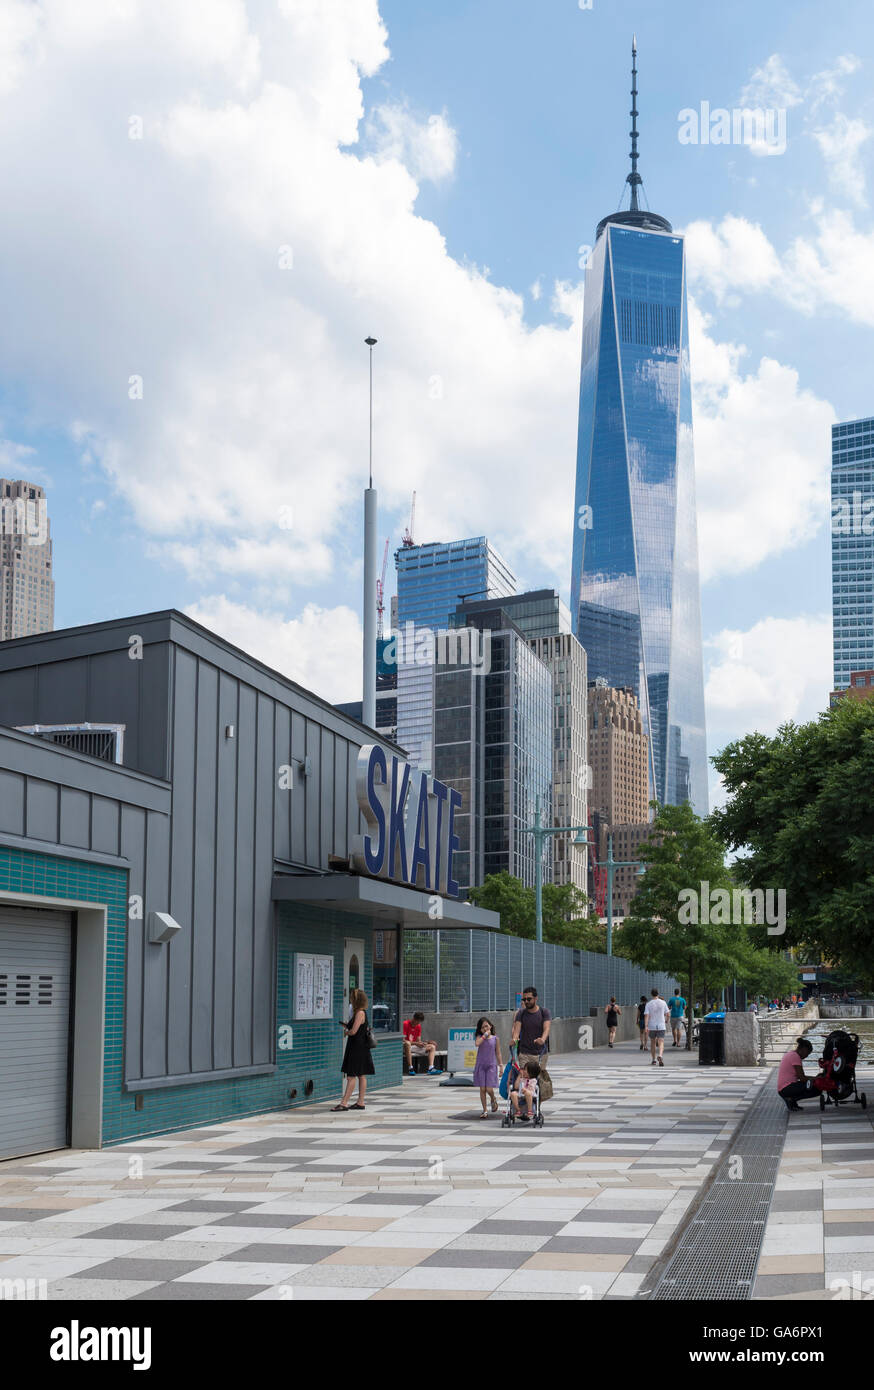 View of Hudson River Park skate park in New York in Summer with the One World Trade Center in the background Stock Photo